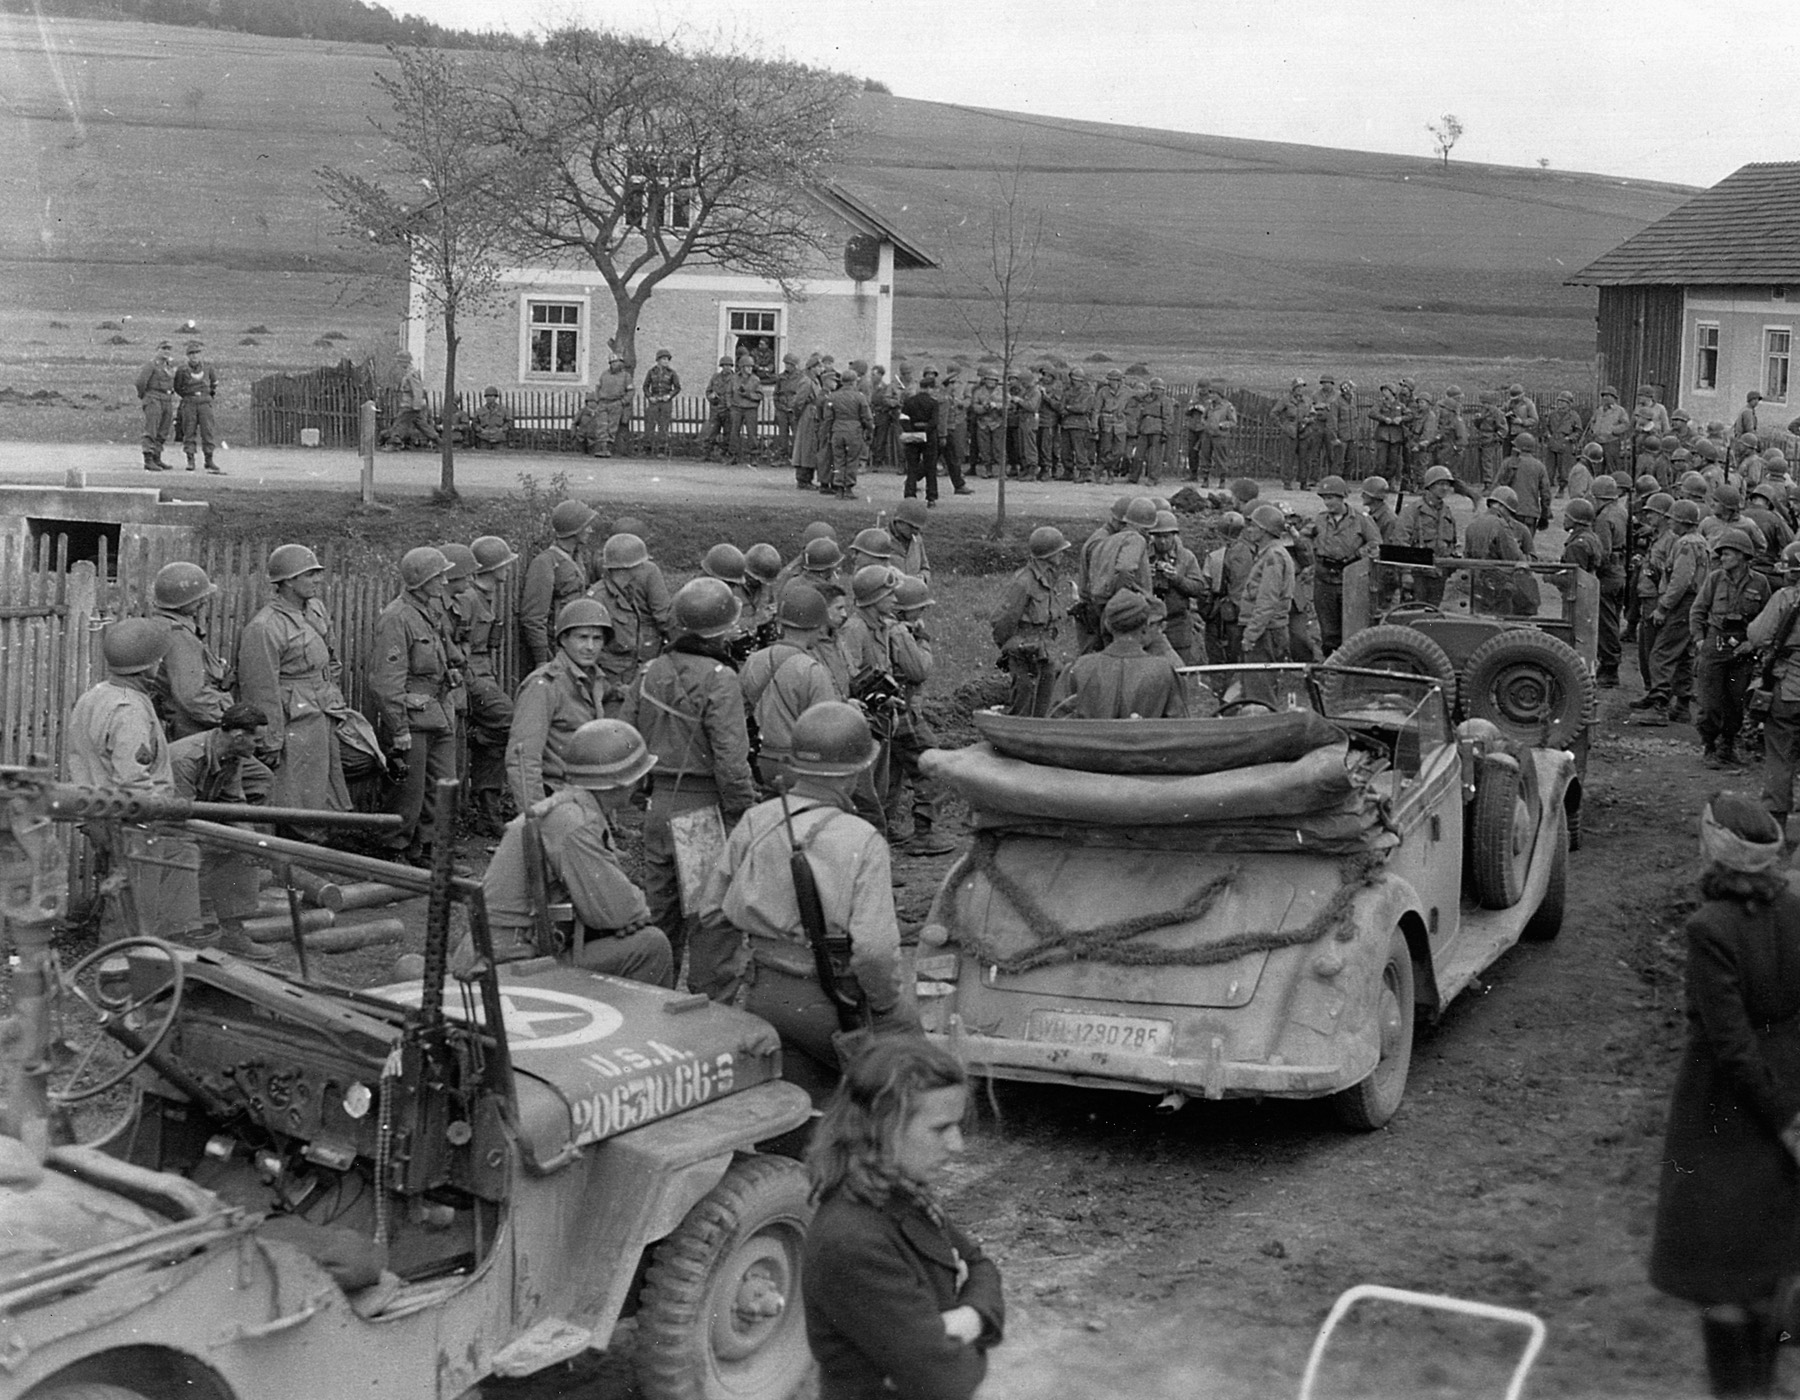 A crowd of 90th and 2nd Infantry Division troops gather as the German 11th Panzer Division makes its formal surrender in May 1945.